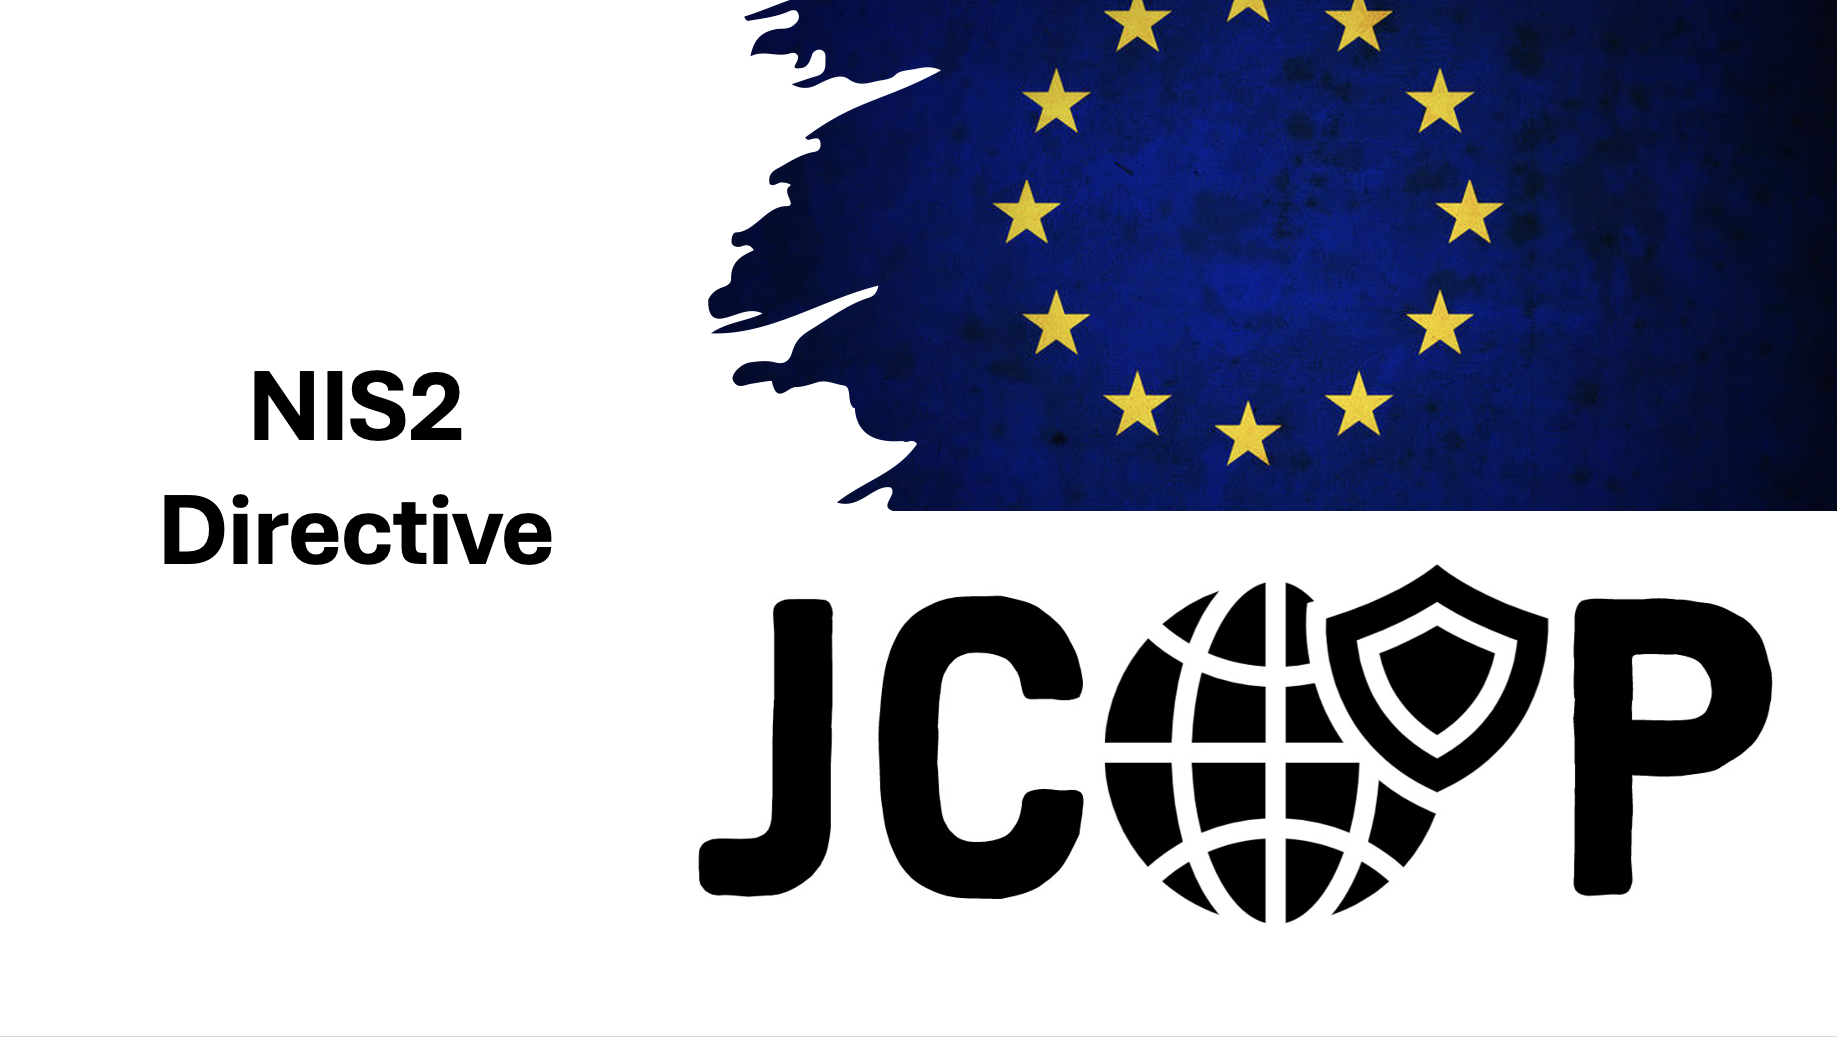 JCOP and NIS2 Directive